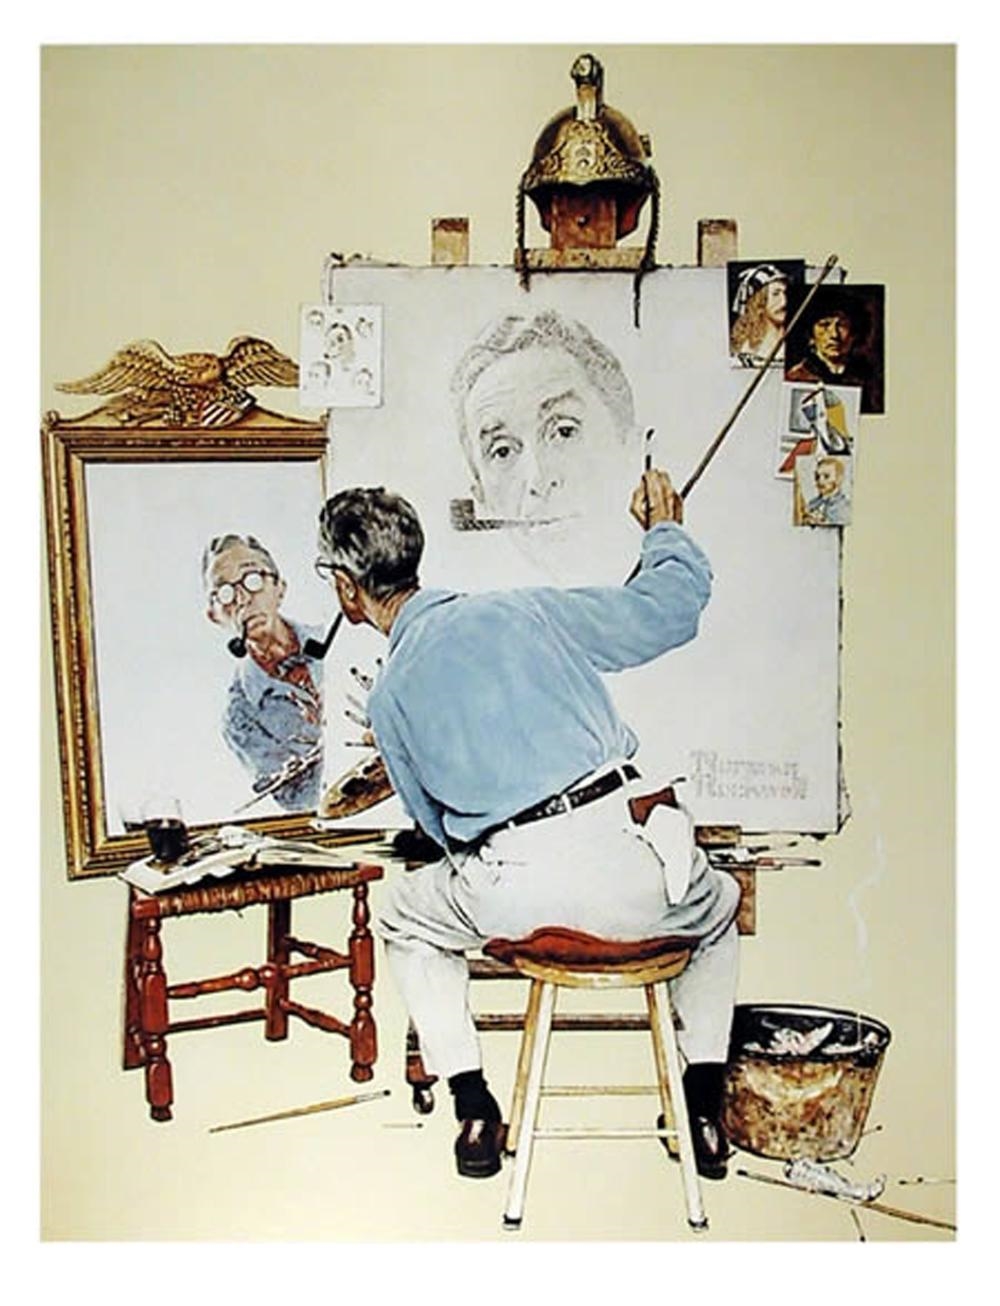 Biography (Self Portait) by Norman Rockwell, 1972